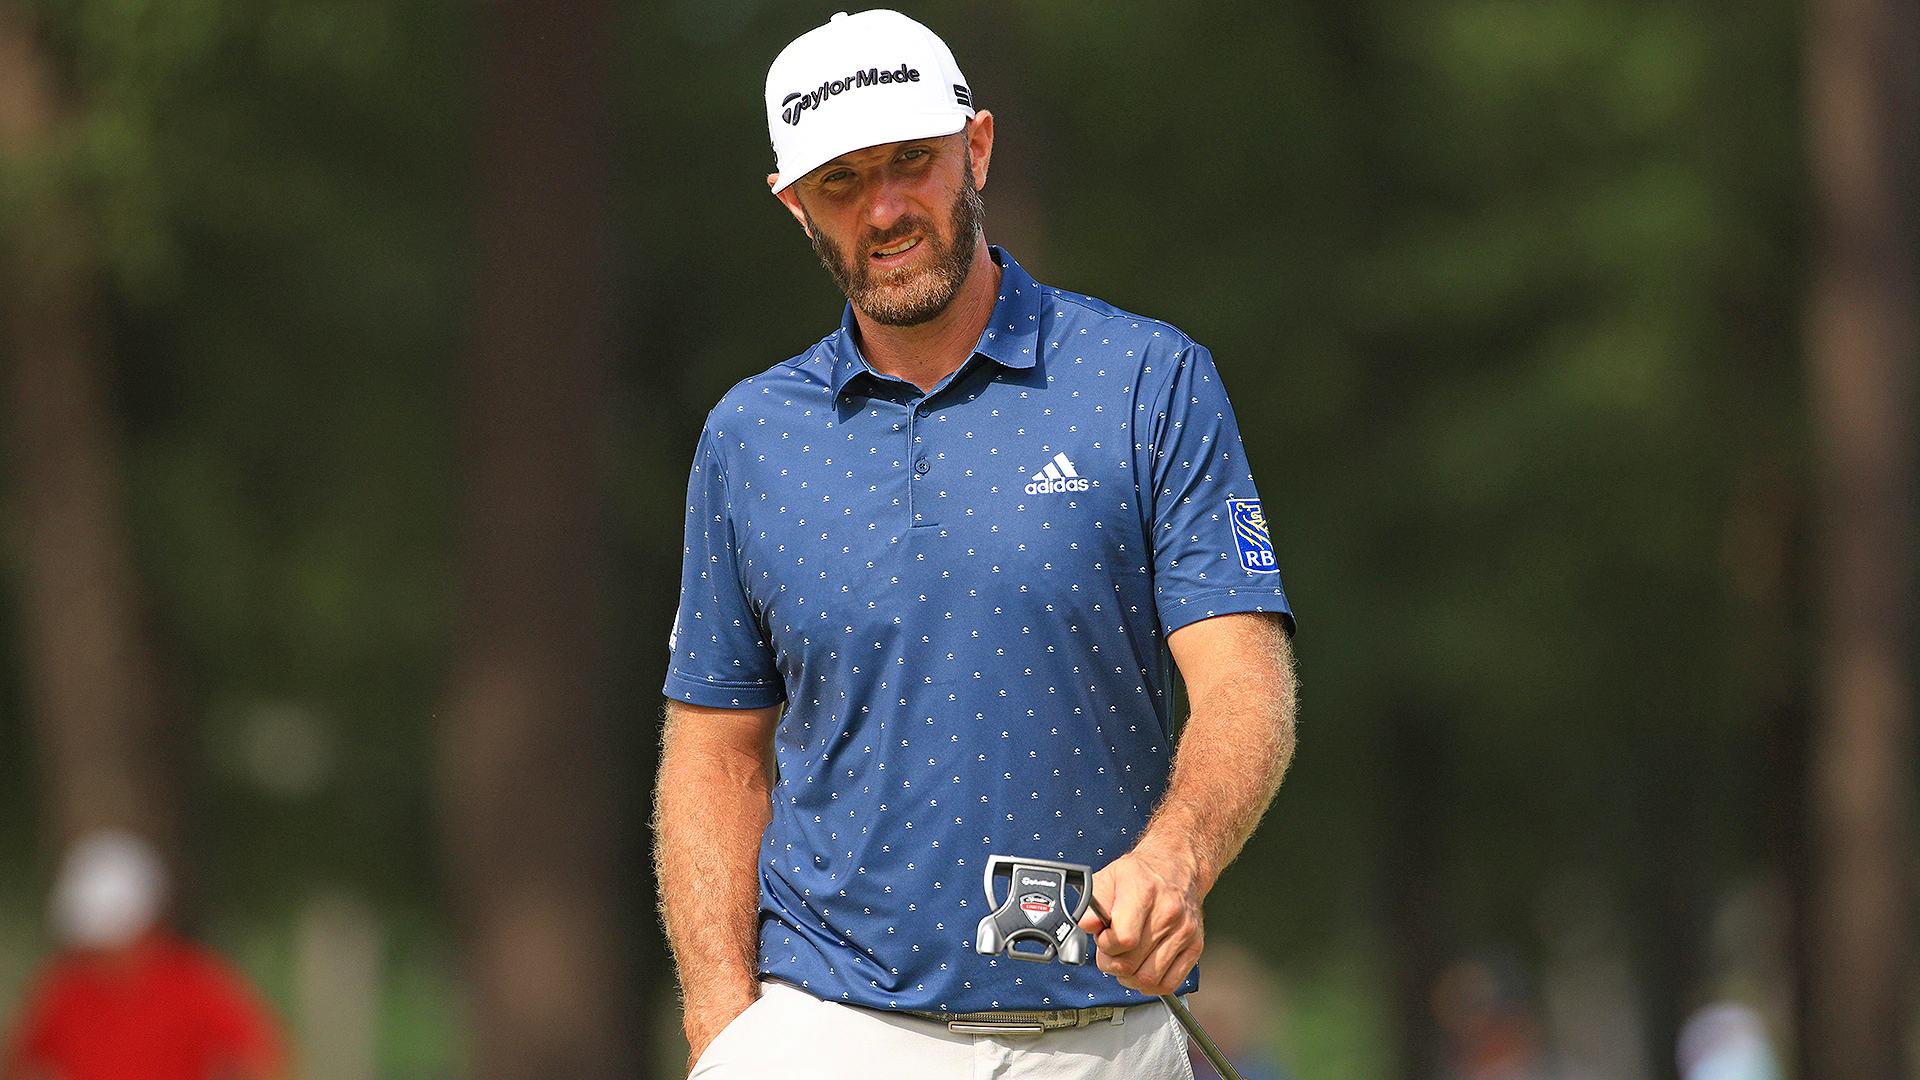 Dustin Johnson does everything well in shooting bogey-free 65 to lead at Congaree